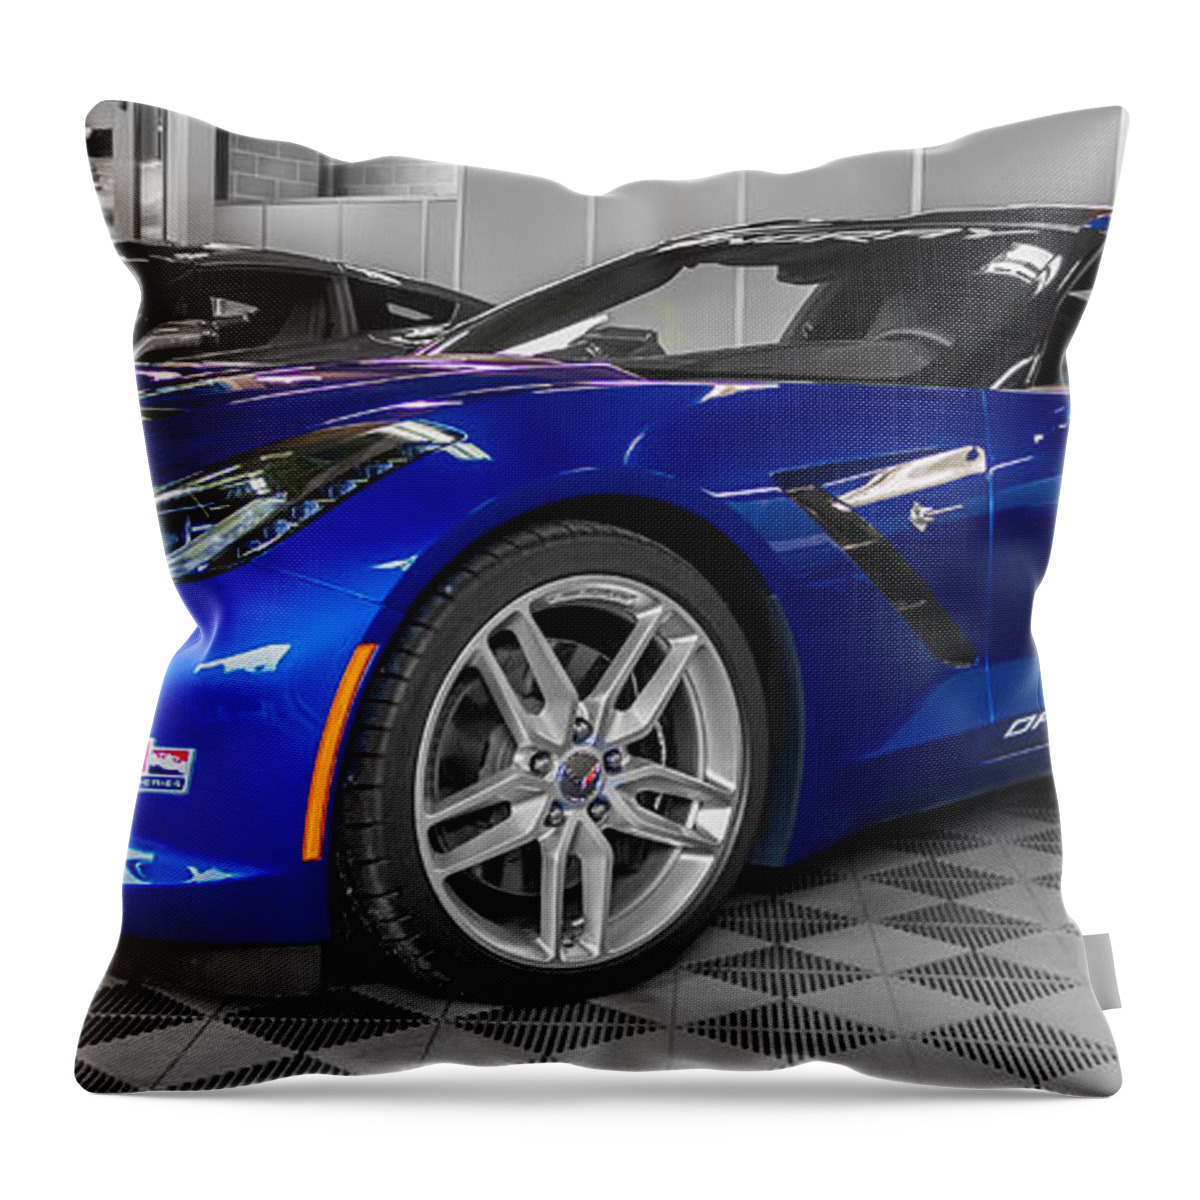 2013 Throw Pillow featuring the photograph Indy 500 Corvette Pace Car by Ron Pate